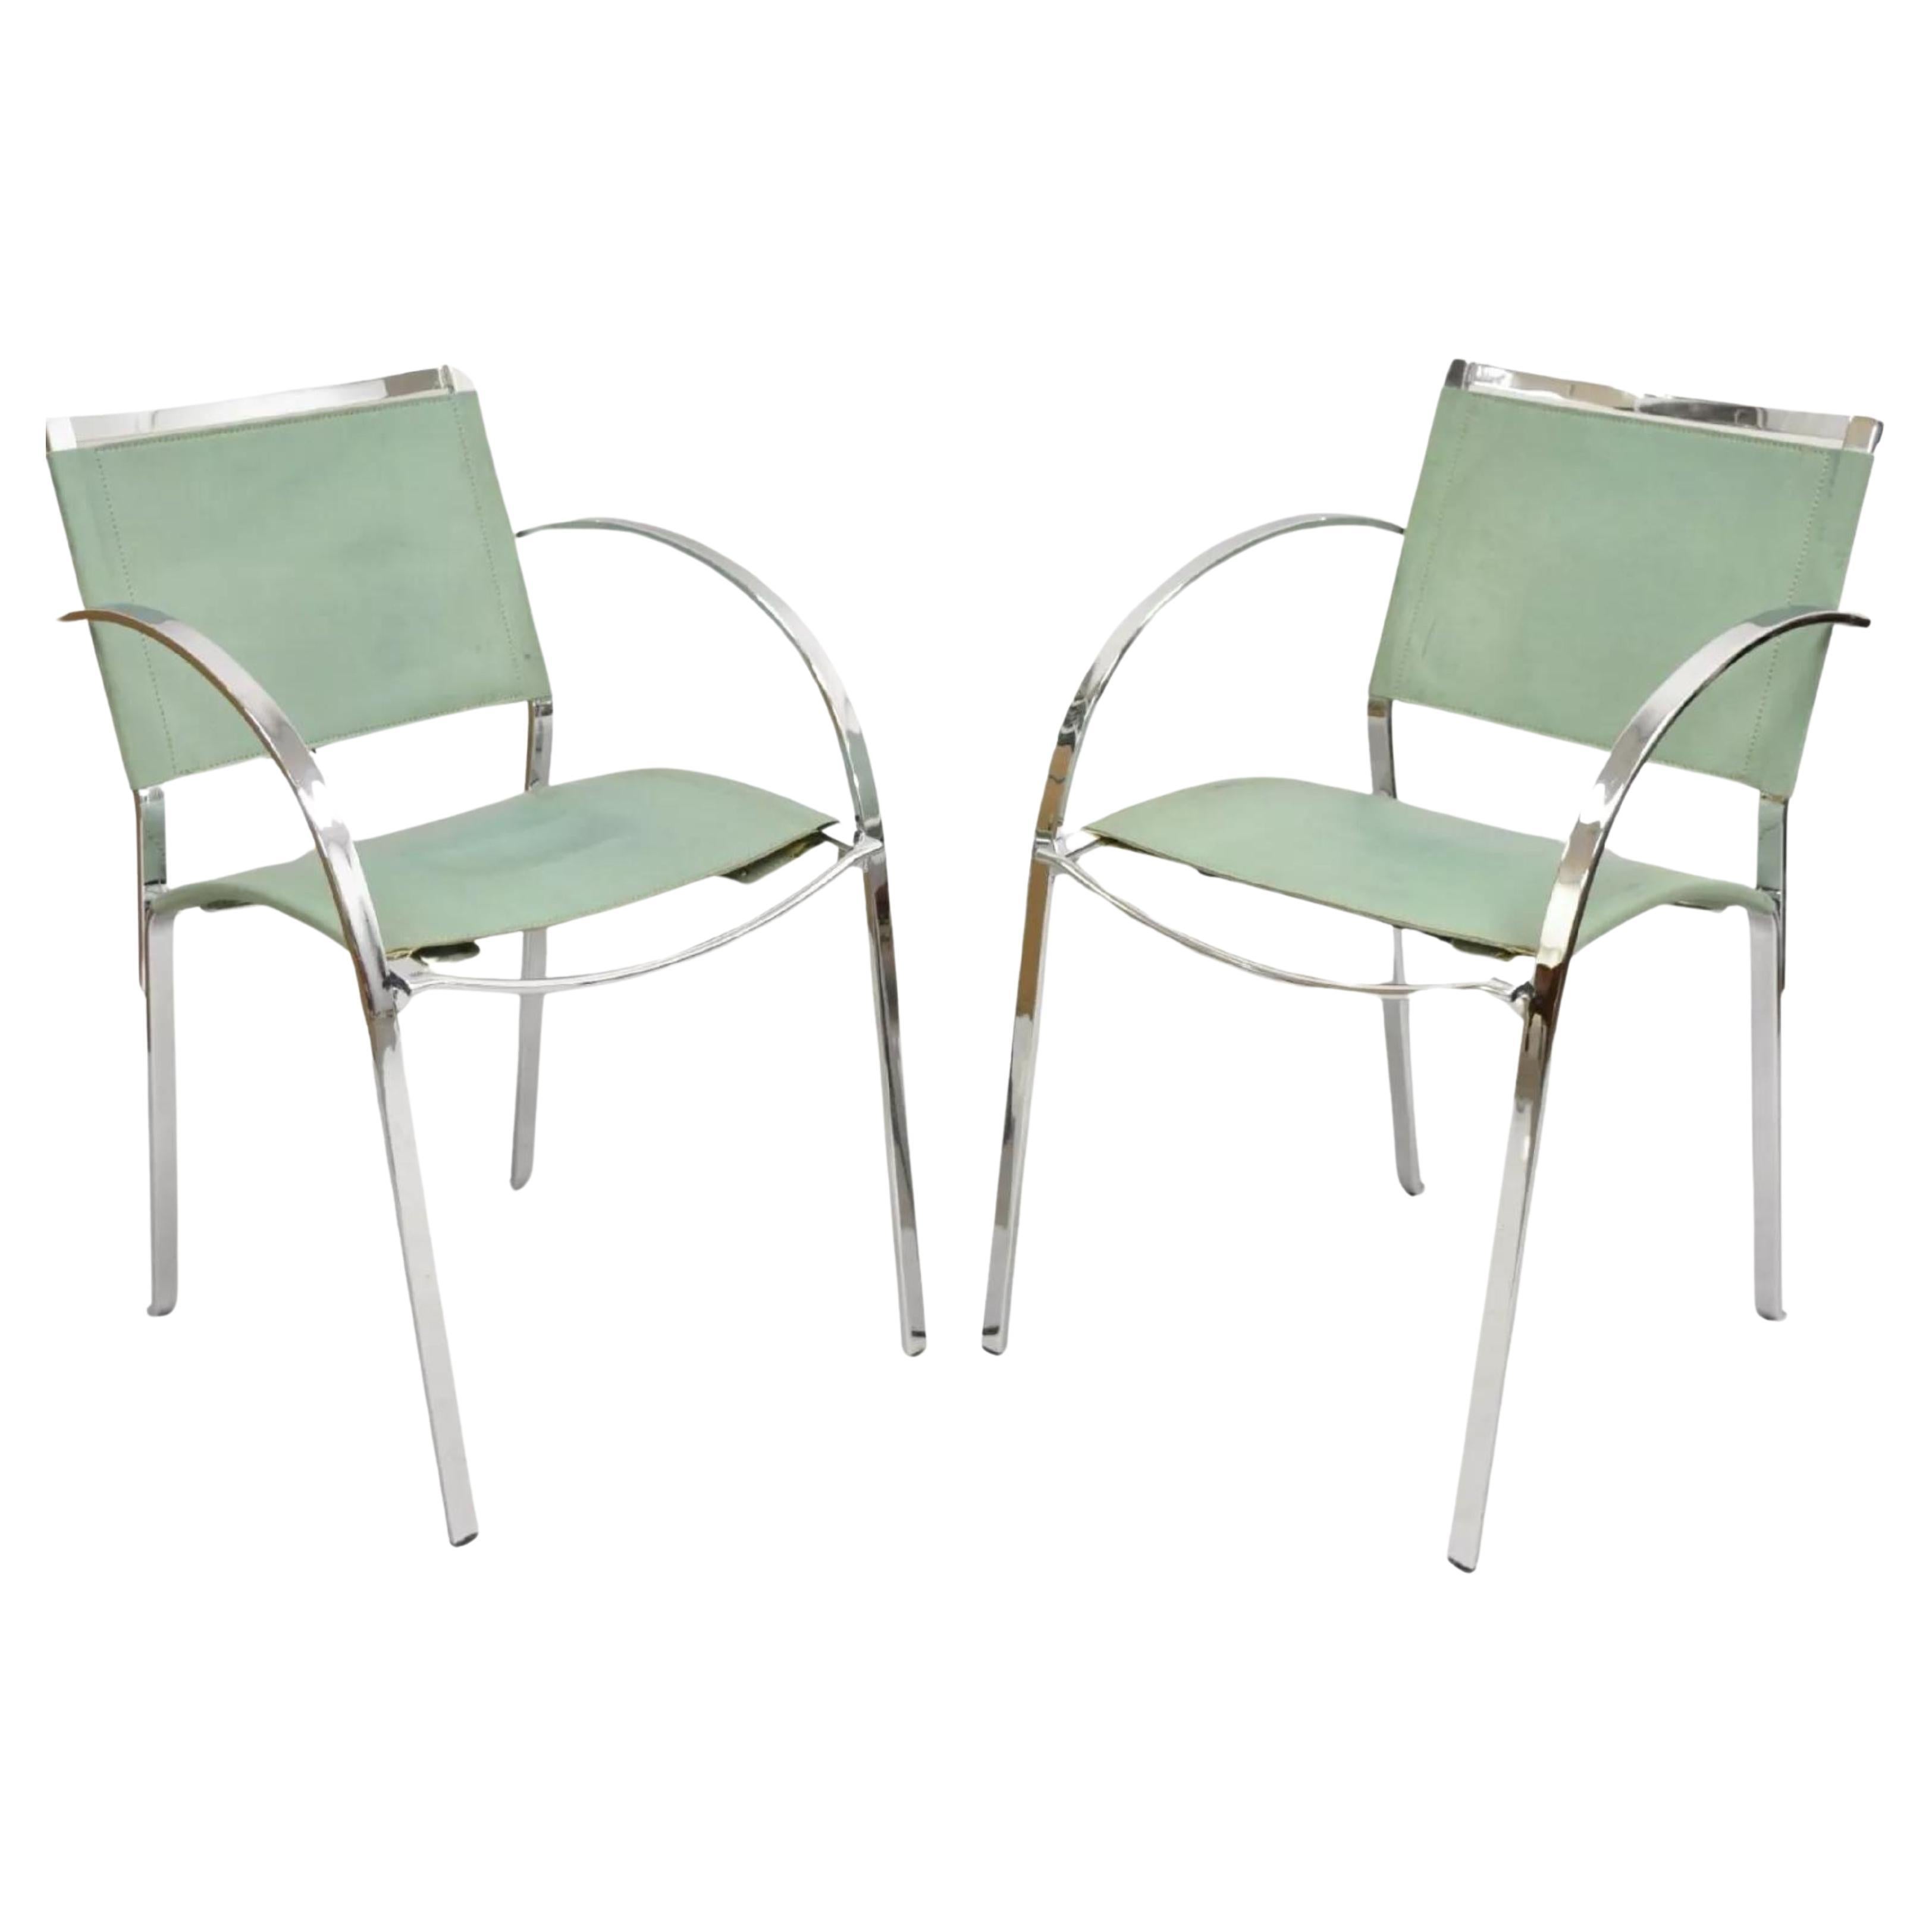 Italian Modern Naos Italy Teal Blue Leather Chrome "Corset" Arm Chairs - a Pair For Sale